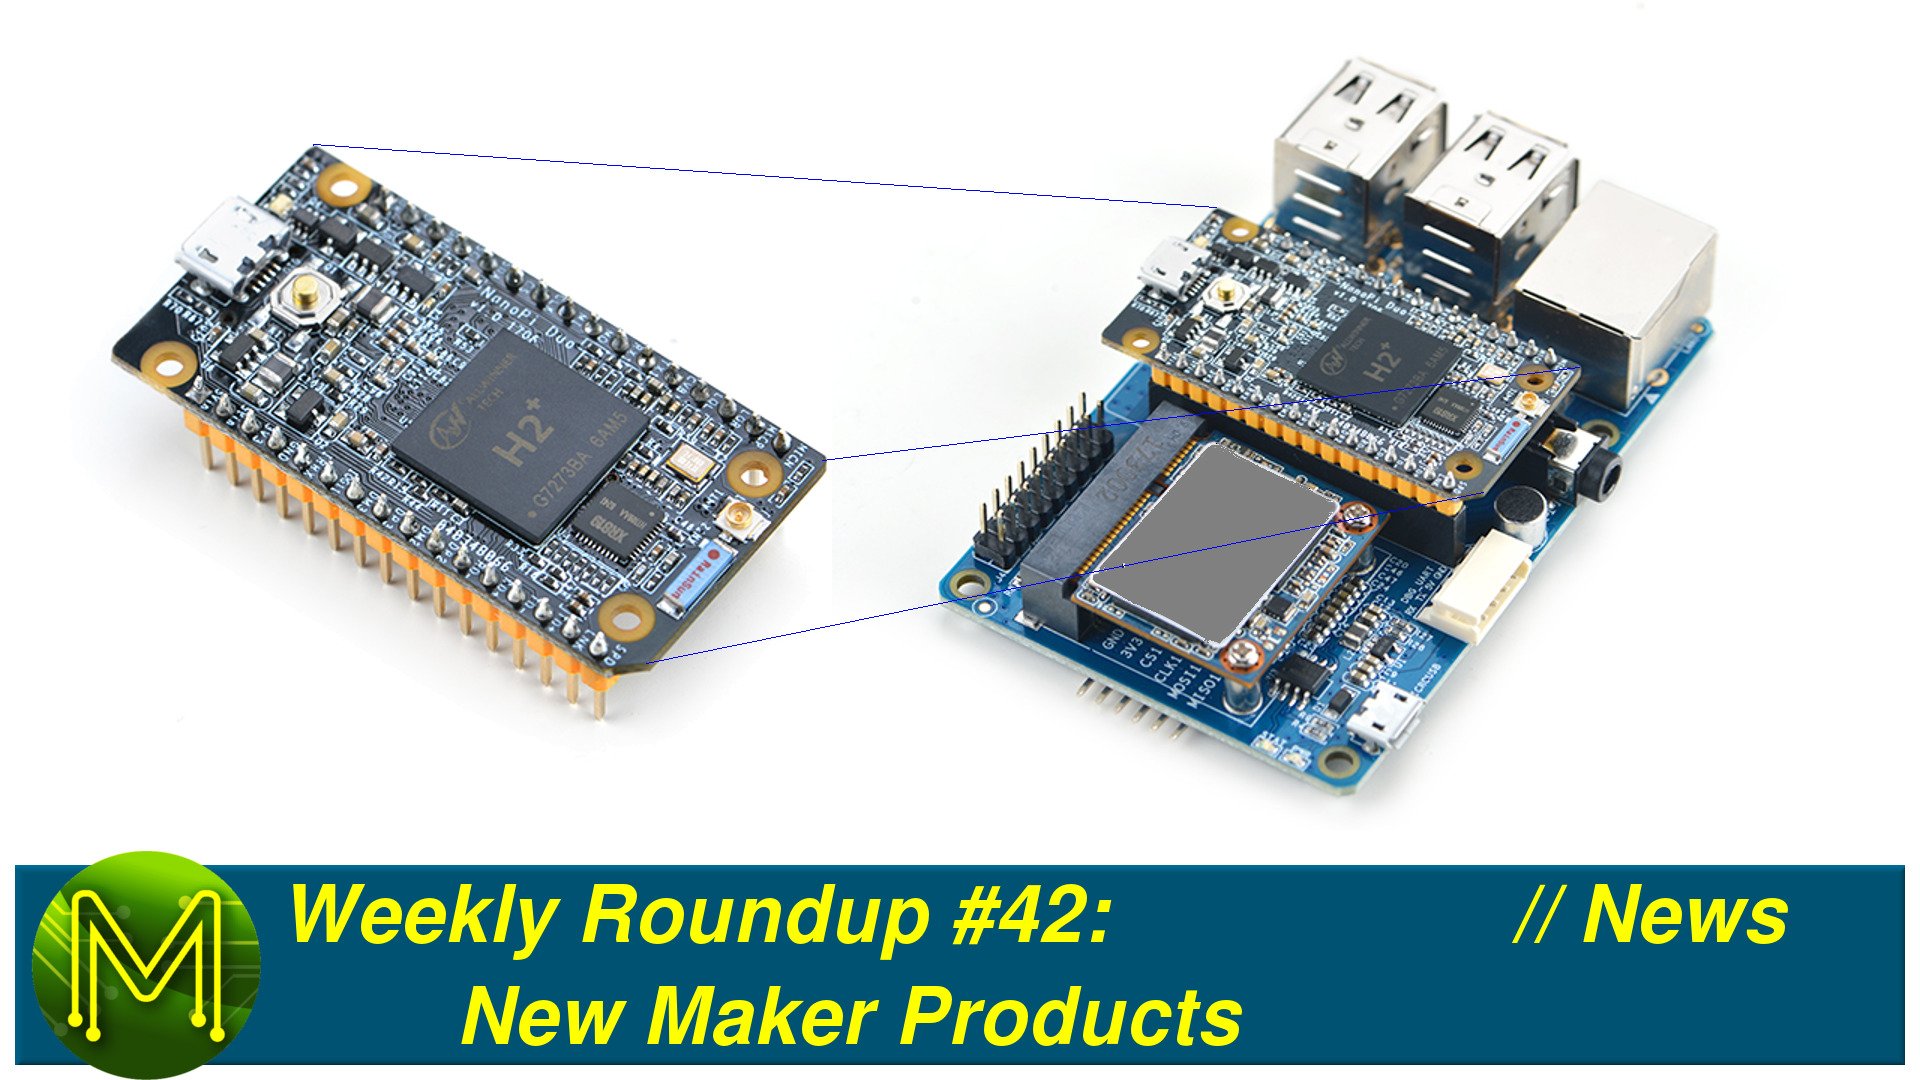 Weekly Roundup #42 - New Maker Products // News